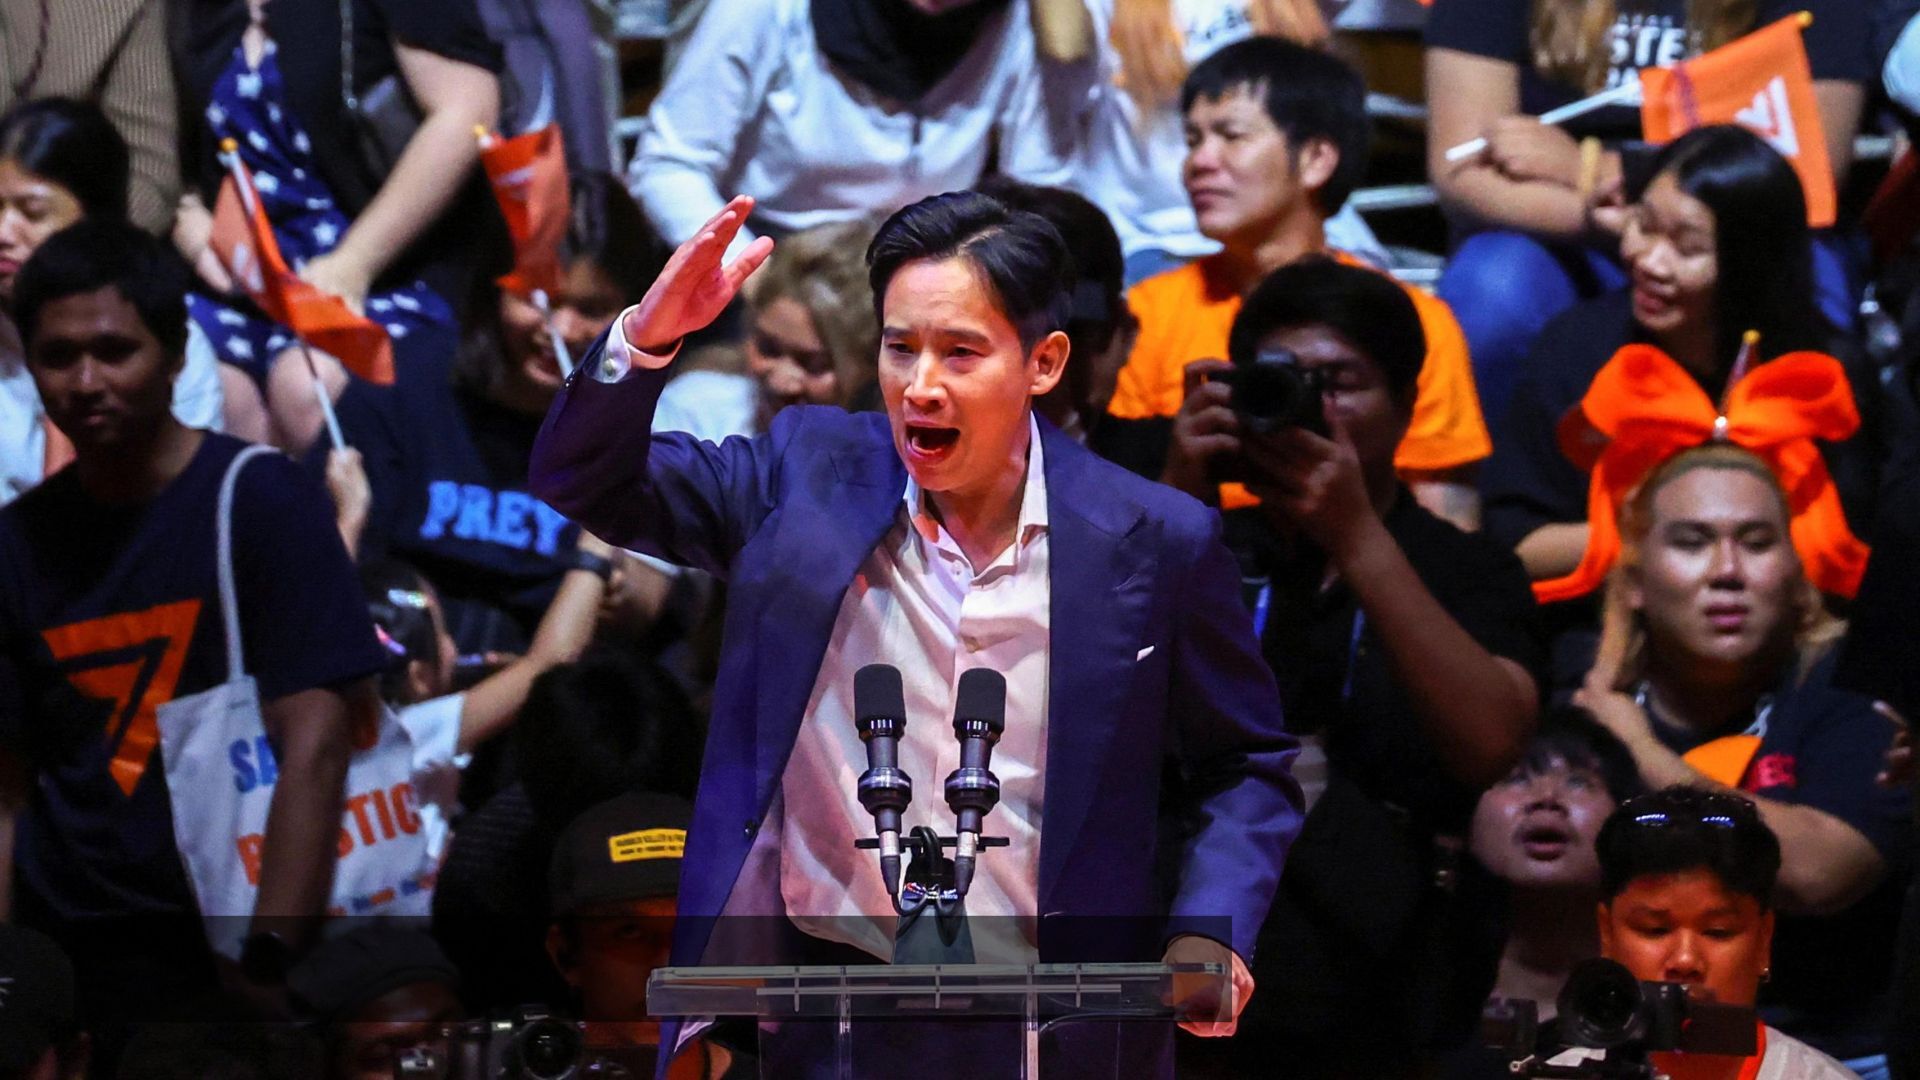 Will the pro-democracy opposition take power in Thailand?